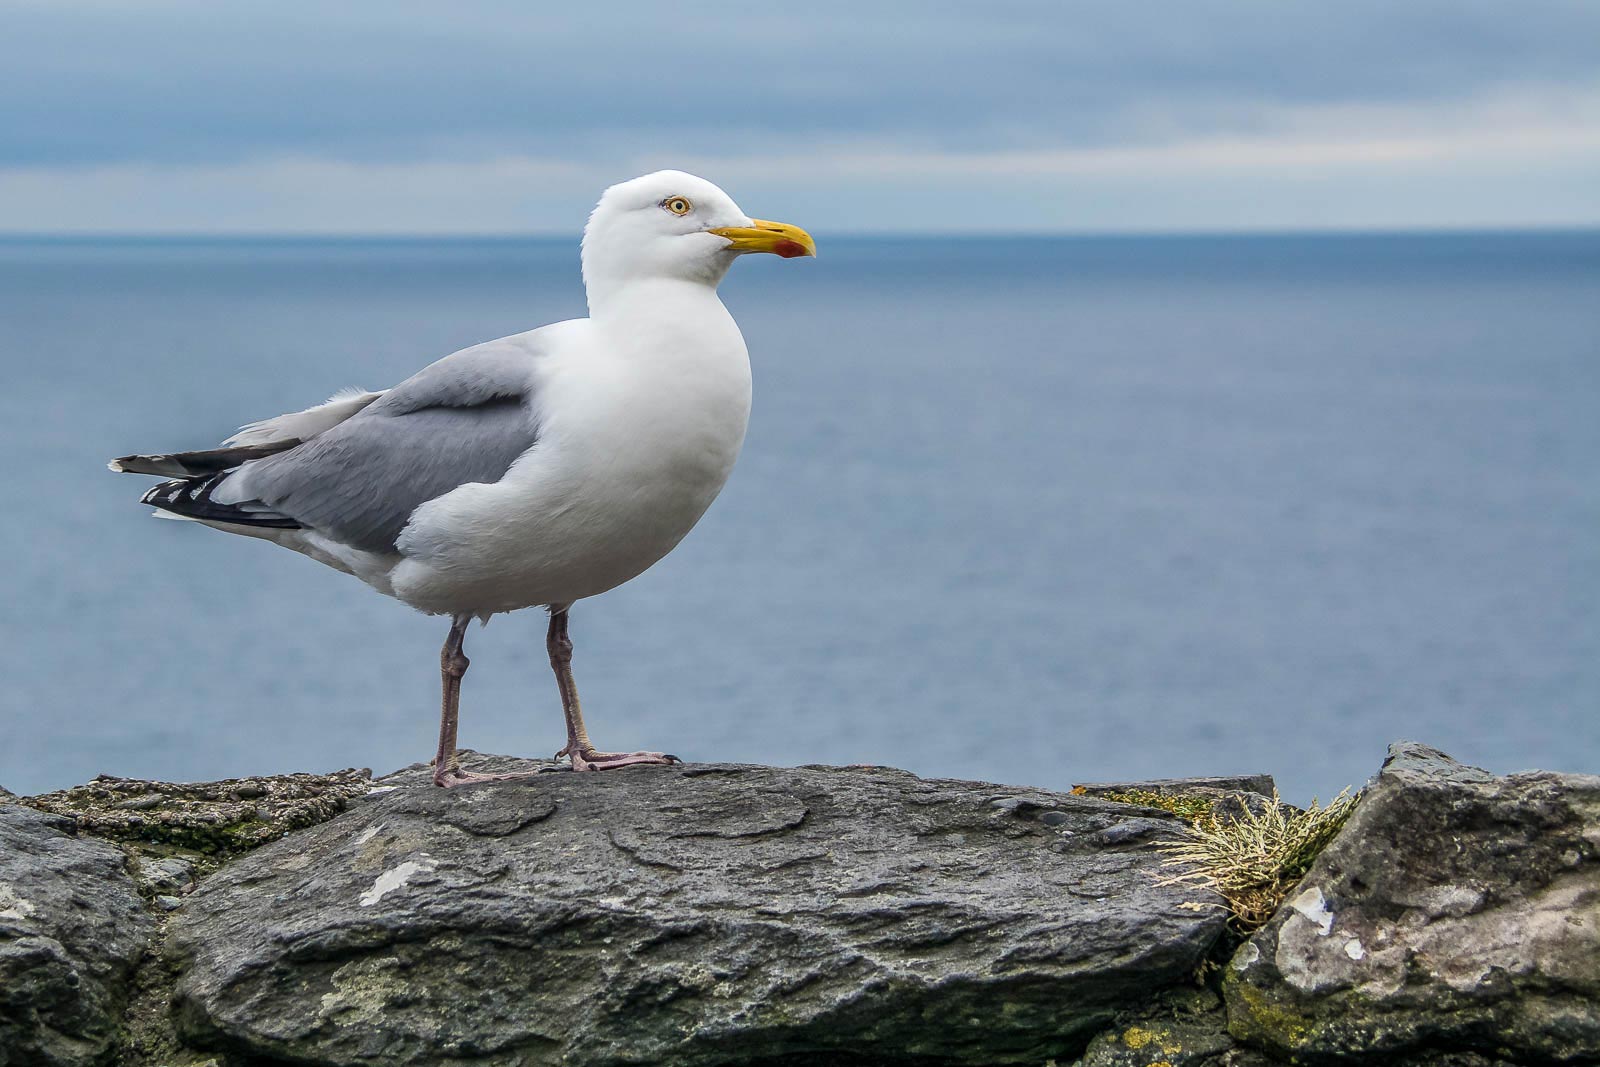 A seagull is standing on top of a wall near the ocean.